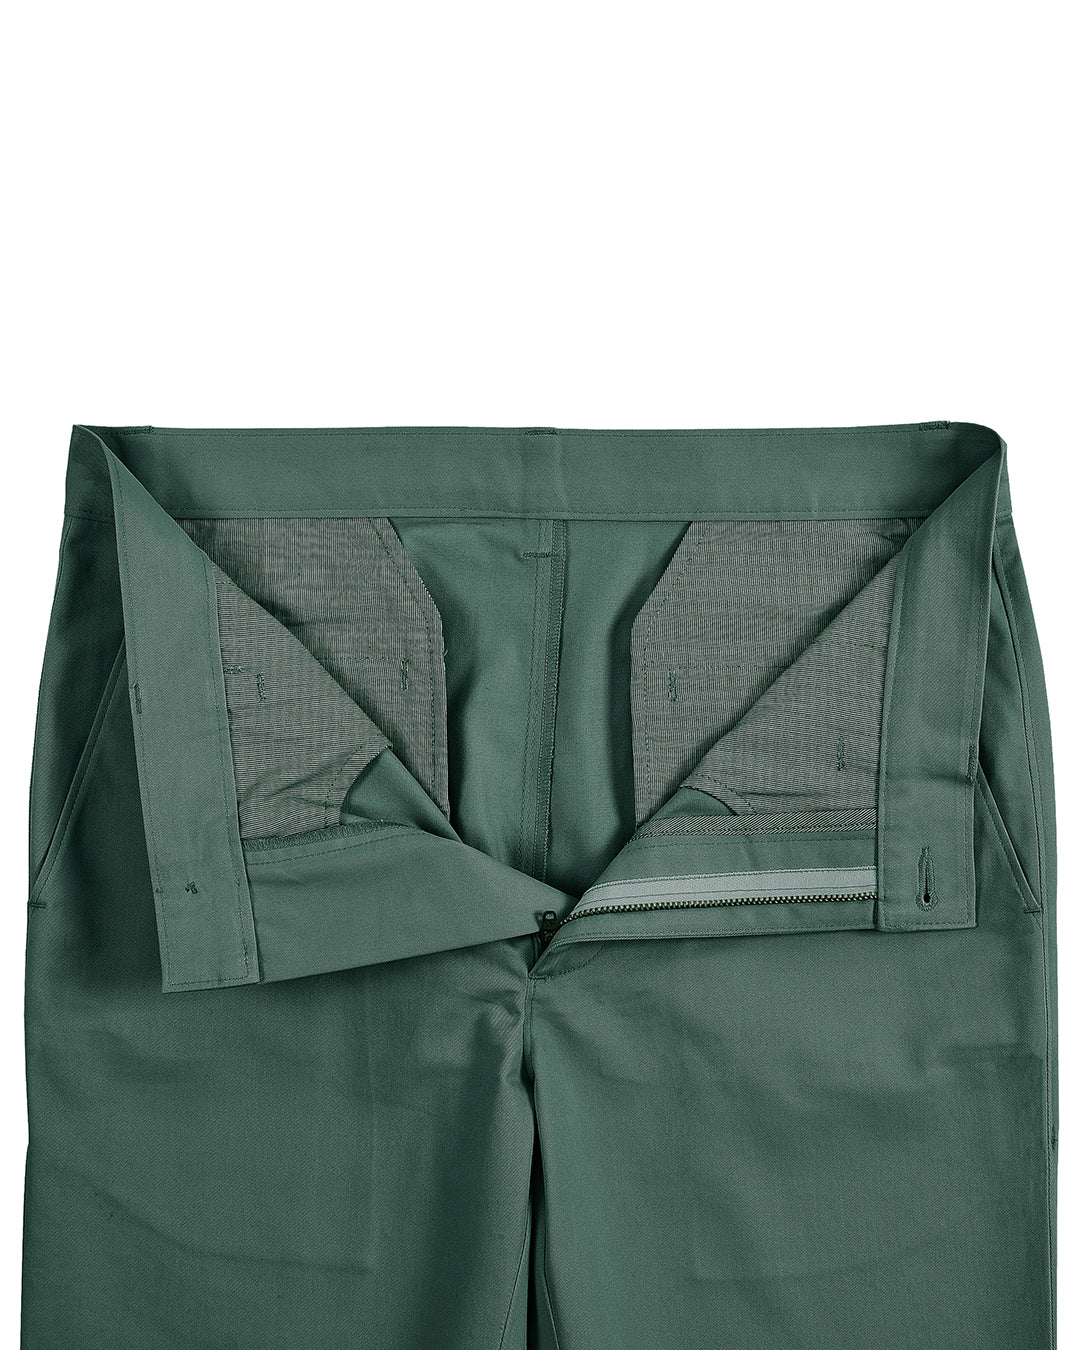 Front open view of custom Genoa Chino pants for men by Luxire in fern green